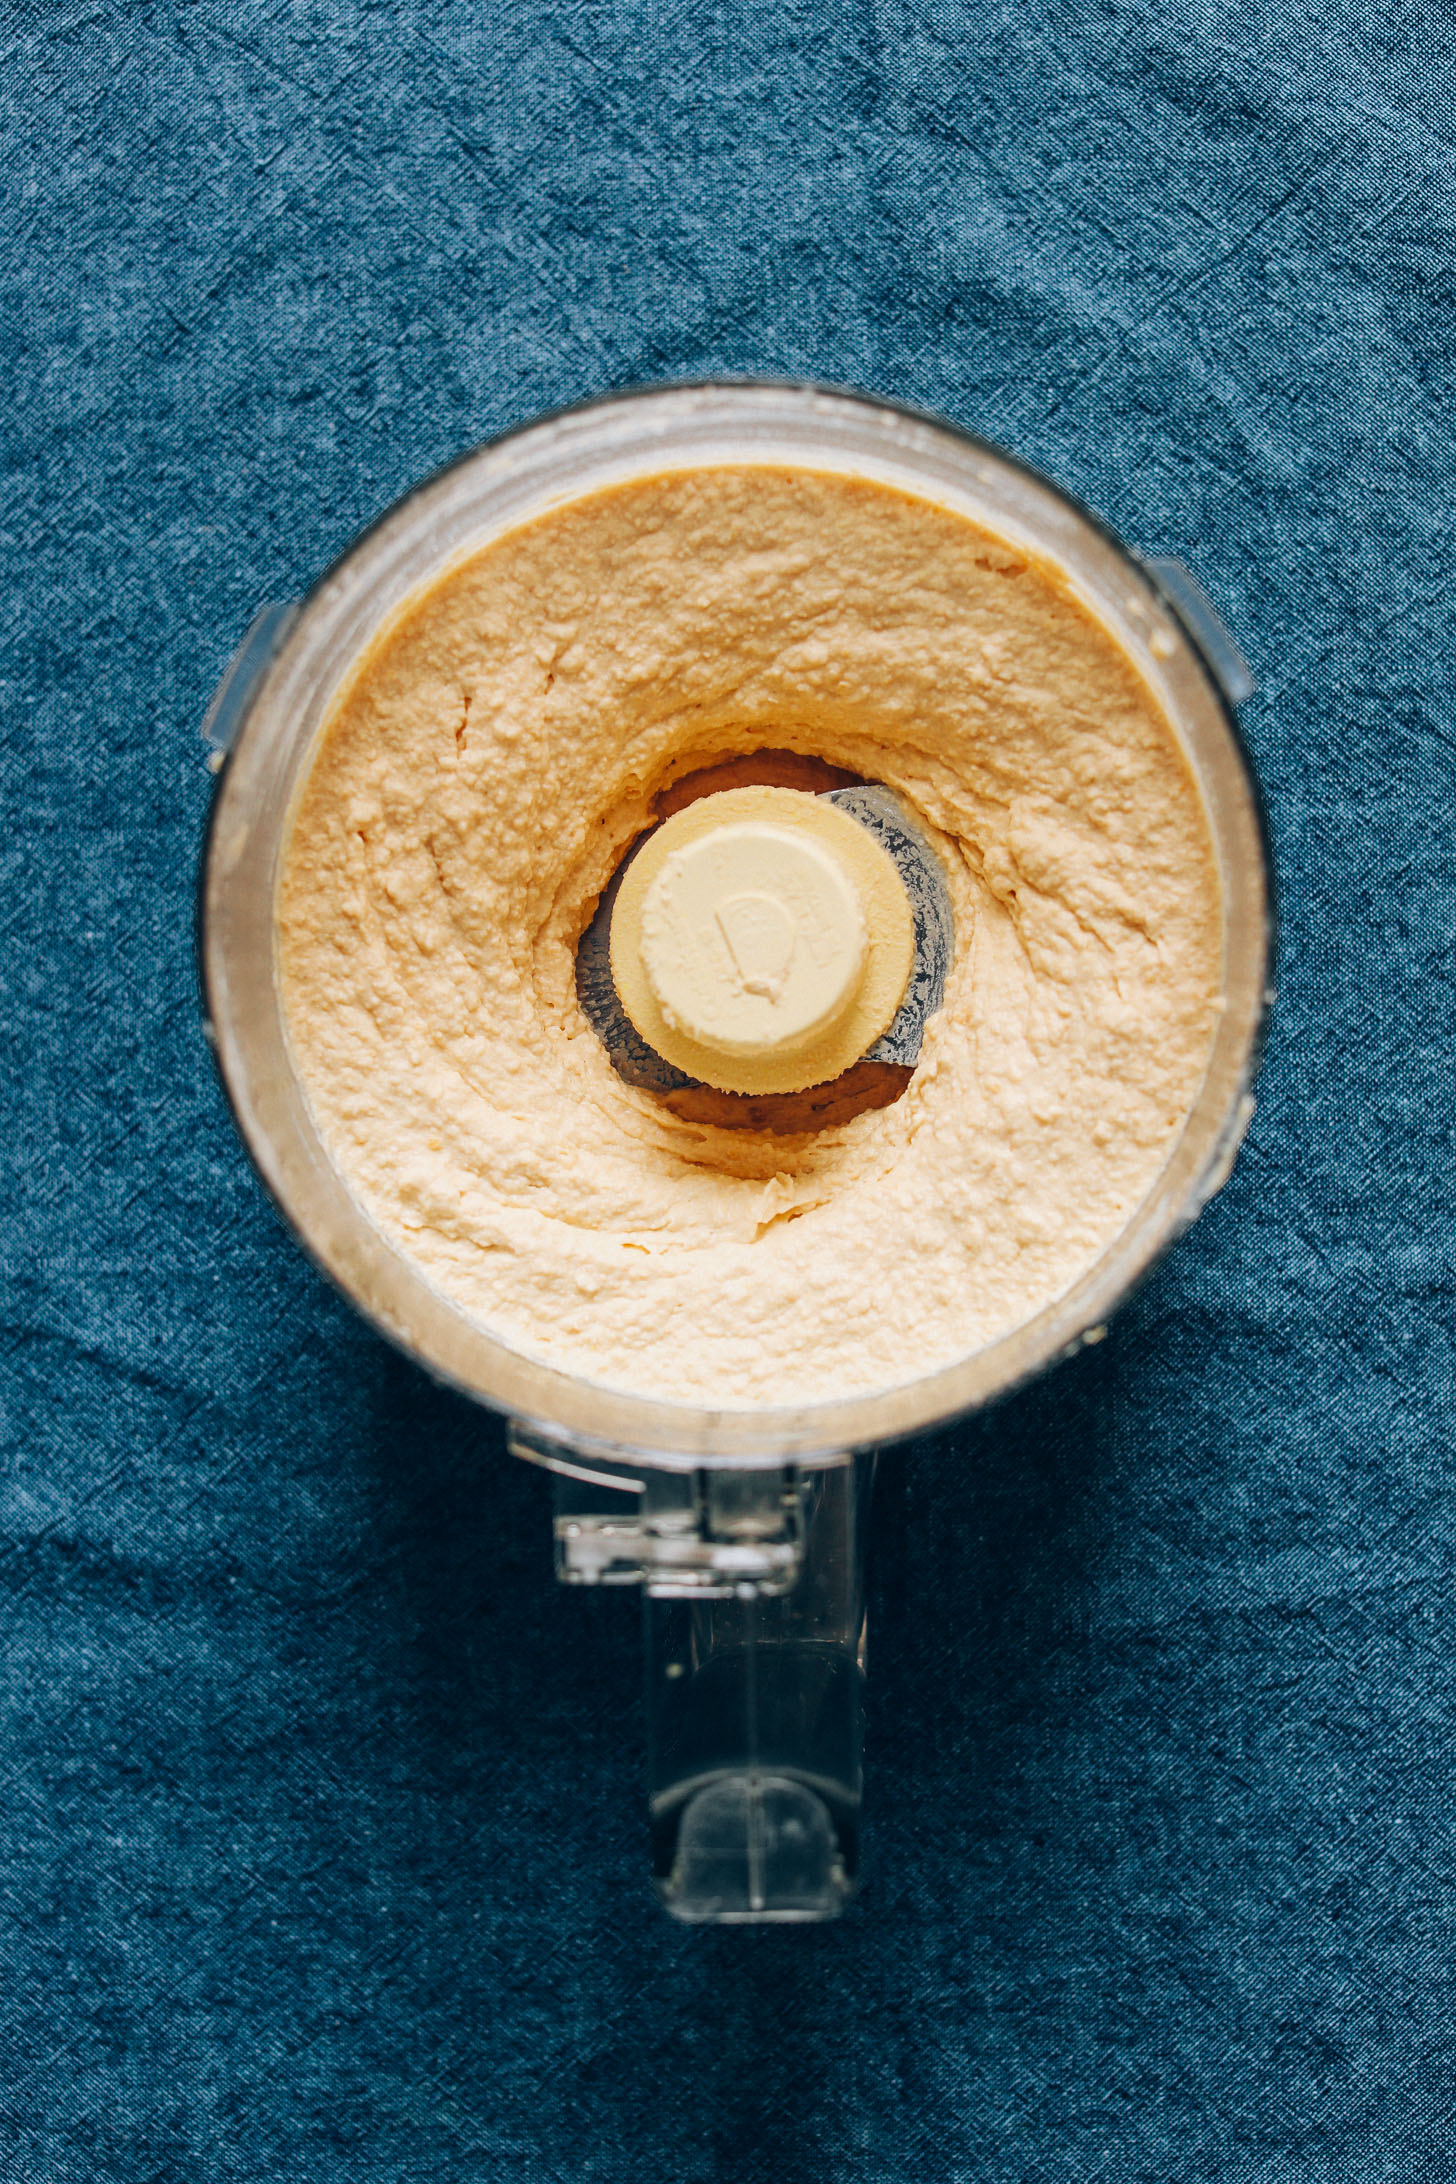 Food processor with delicious homemade hummus from scratch